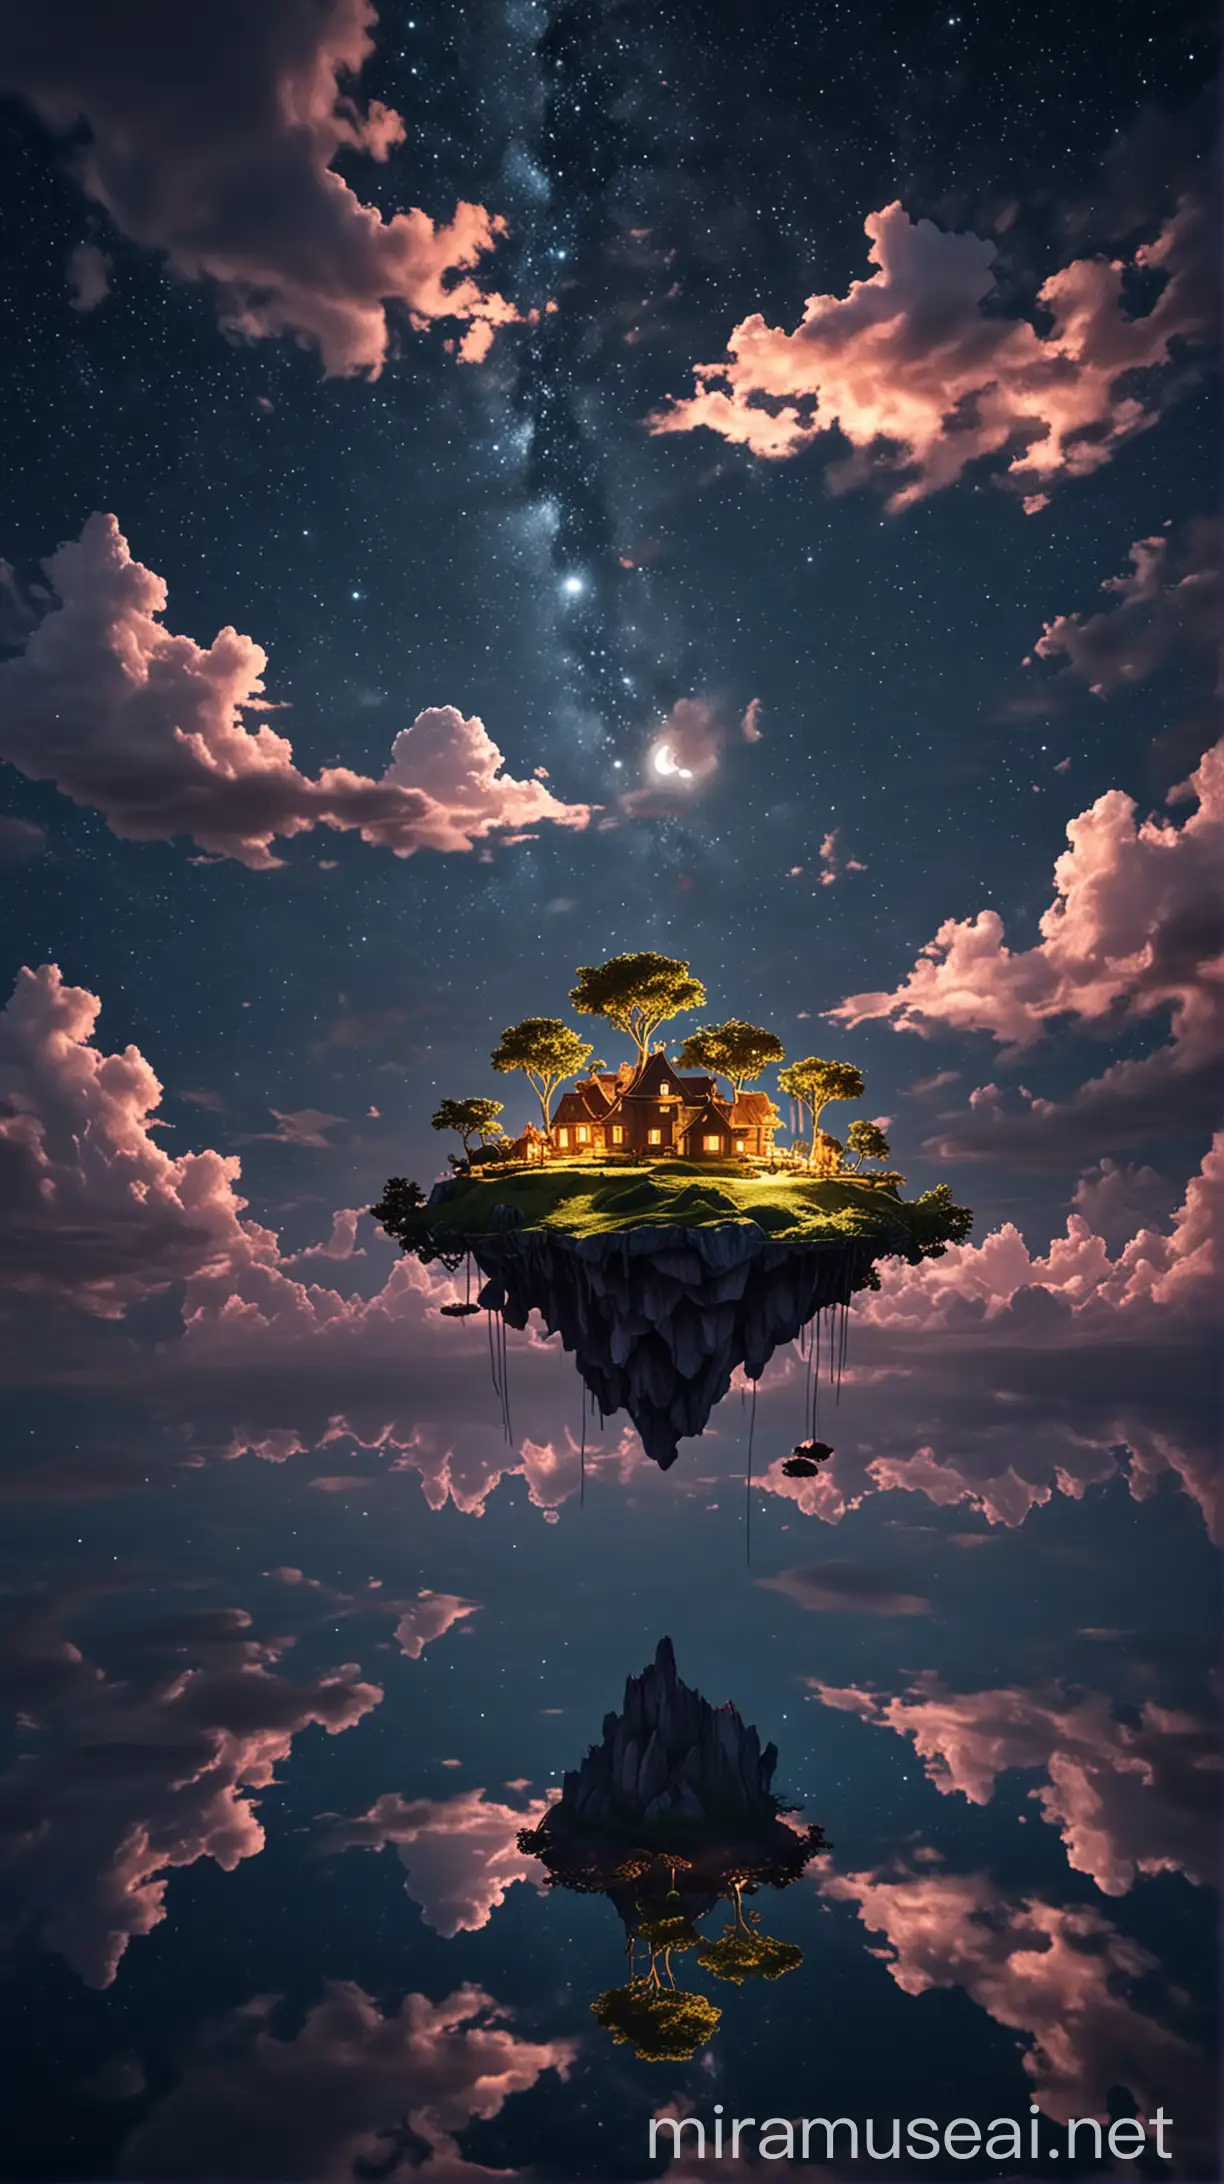 Enchanting Night Sky Floating Islands with Ethereal Clouds